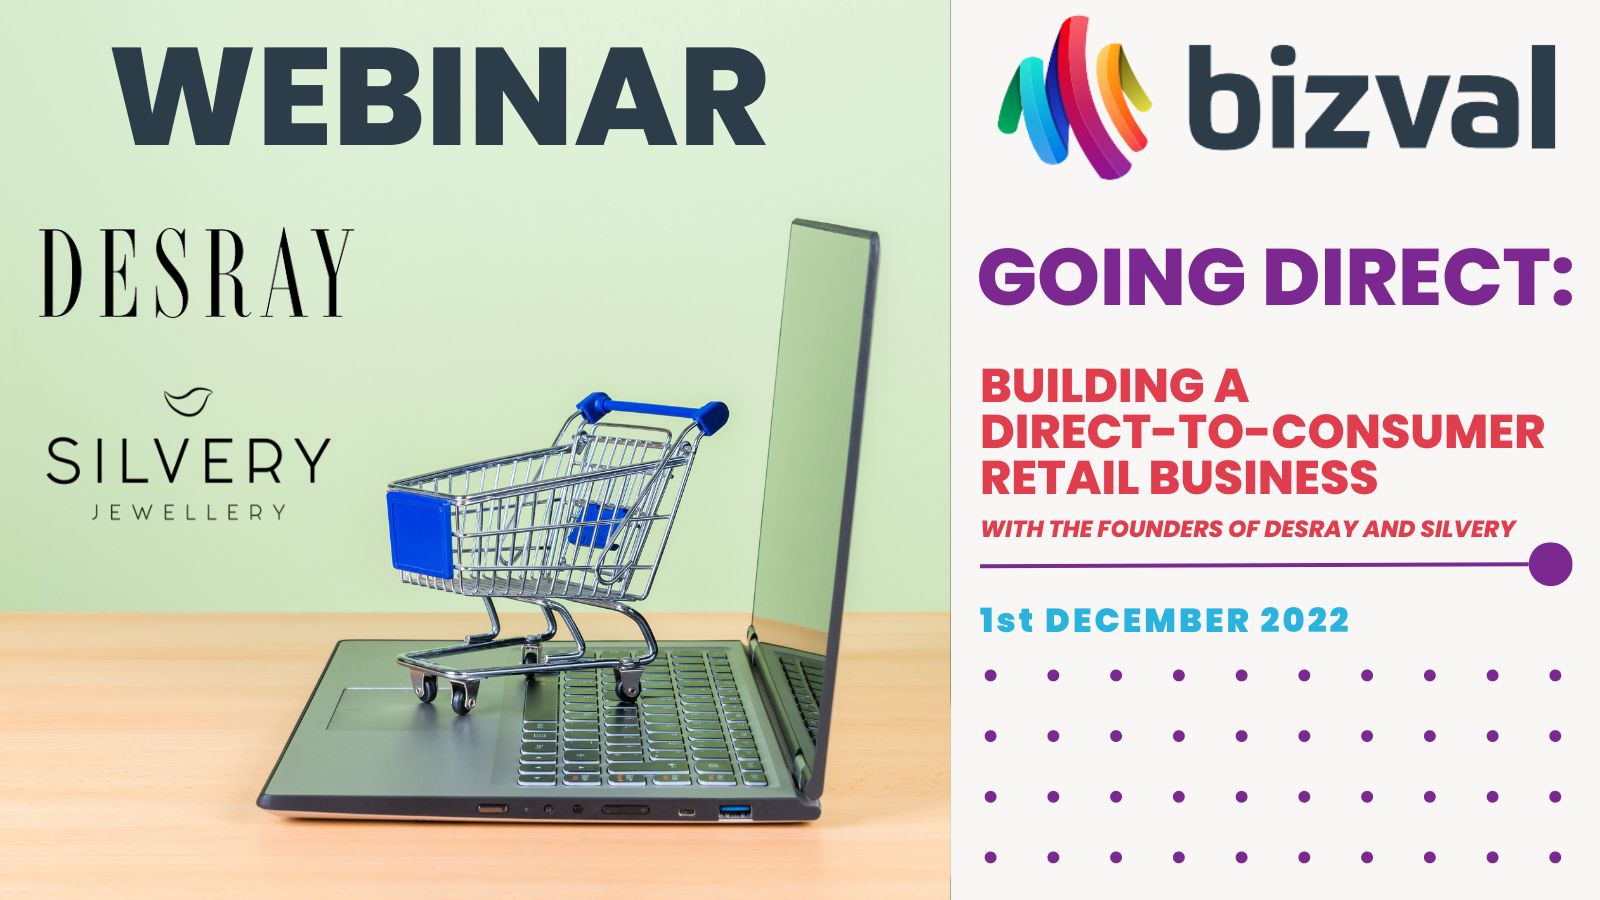 Going direct: building a direct-to-consumer retail business